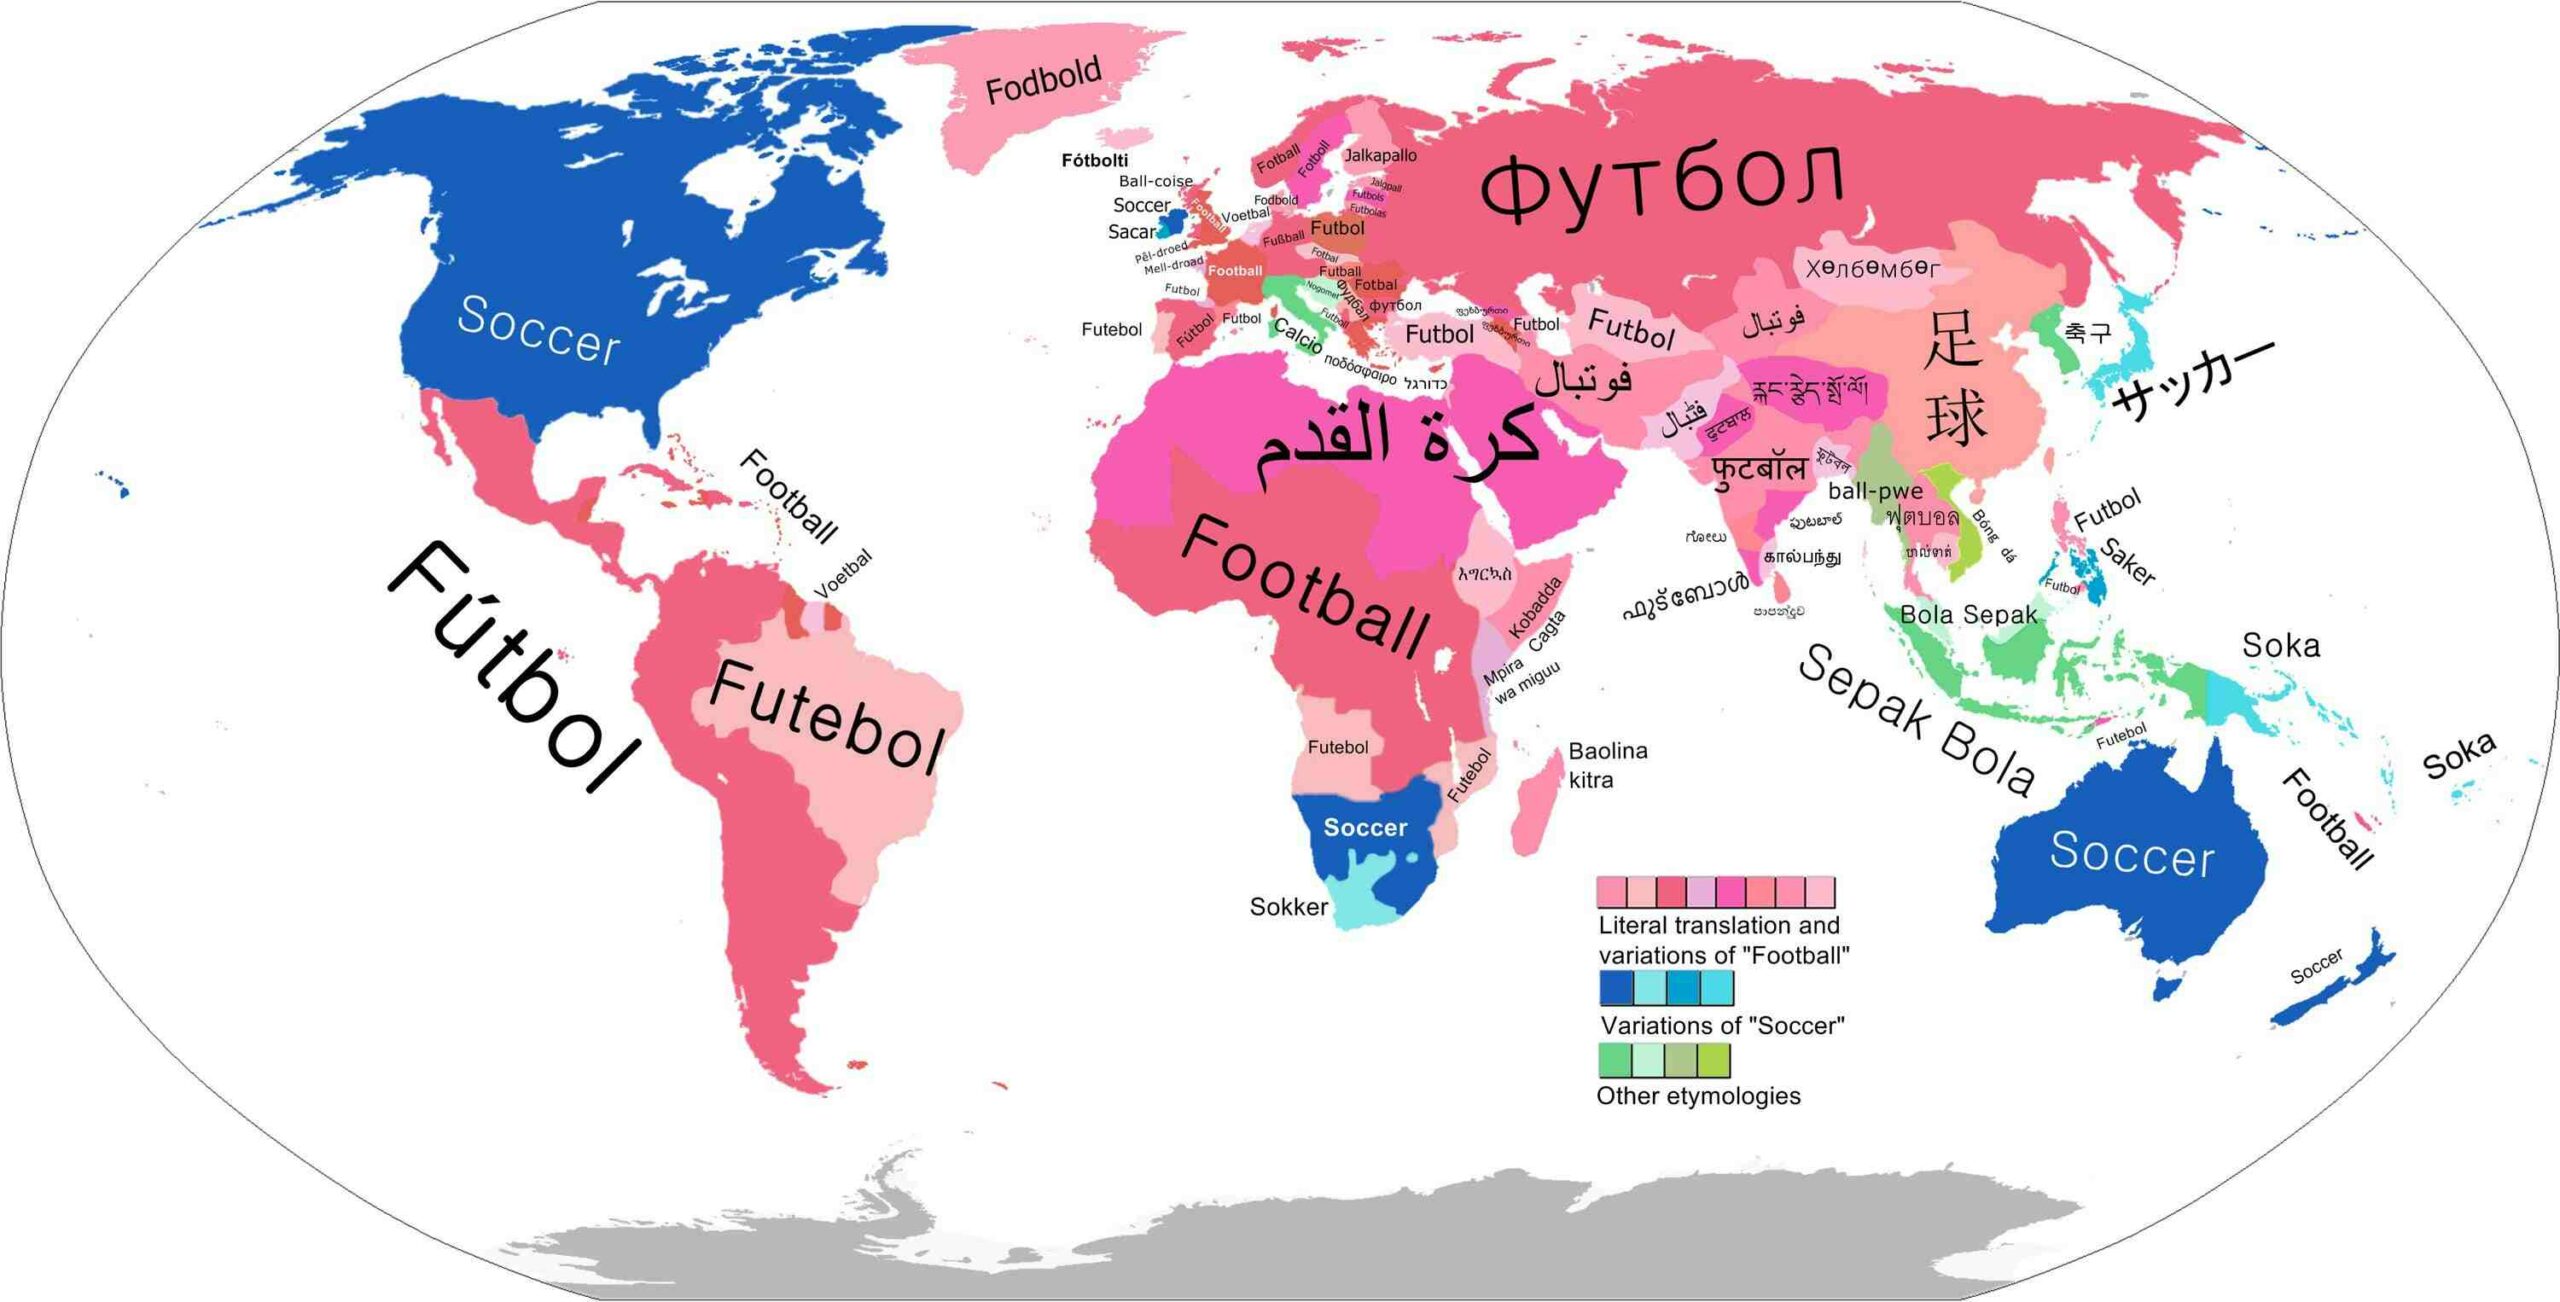 What countries call it soccer?